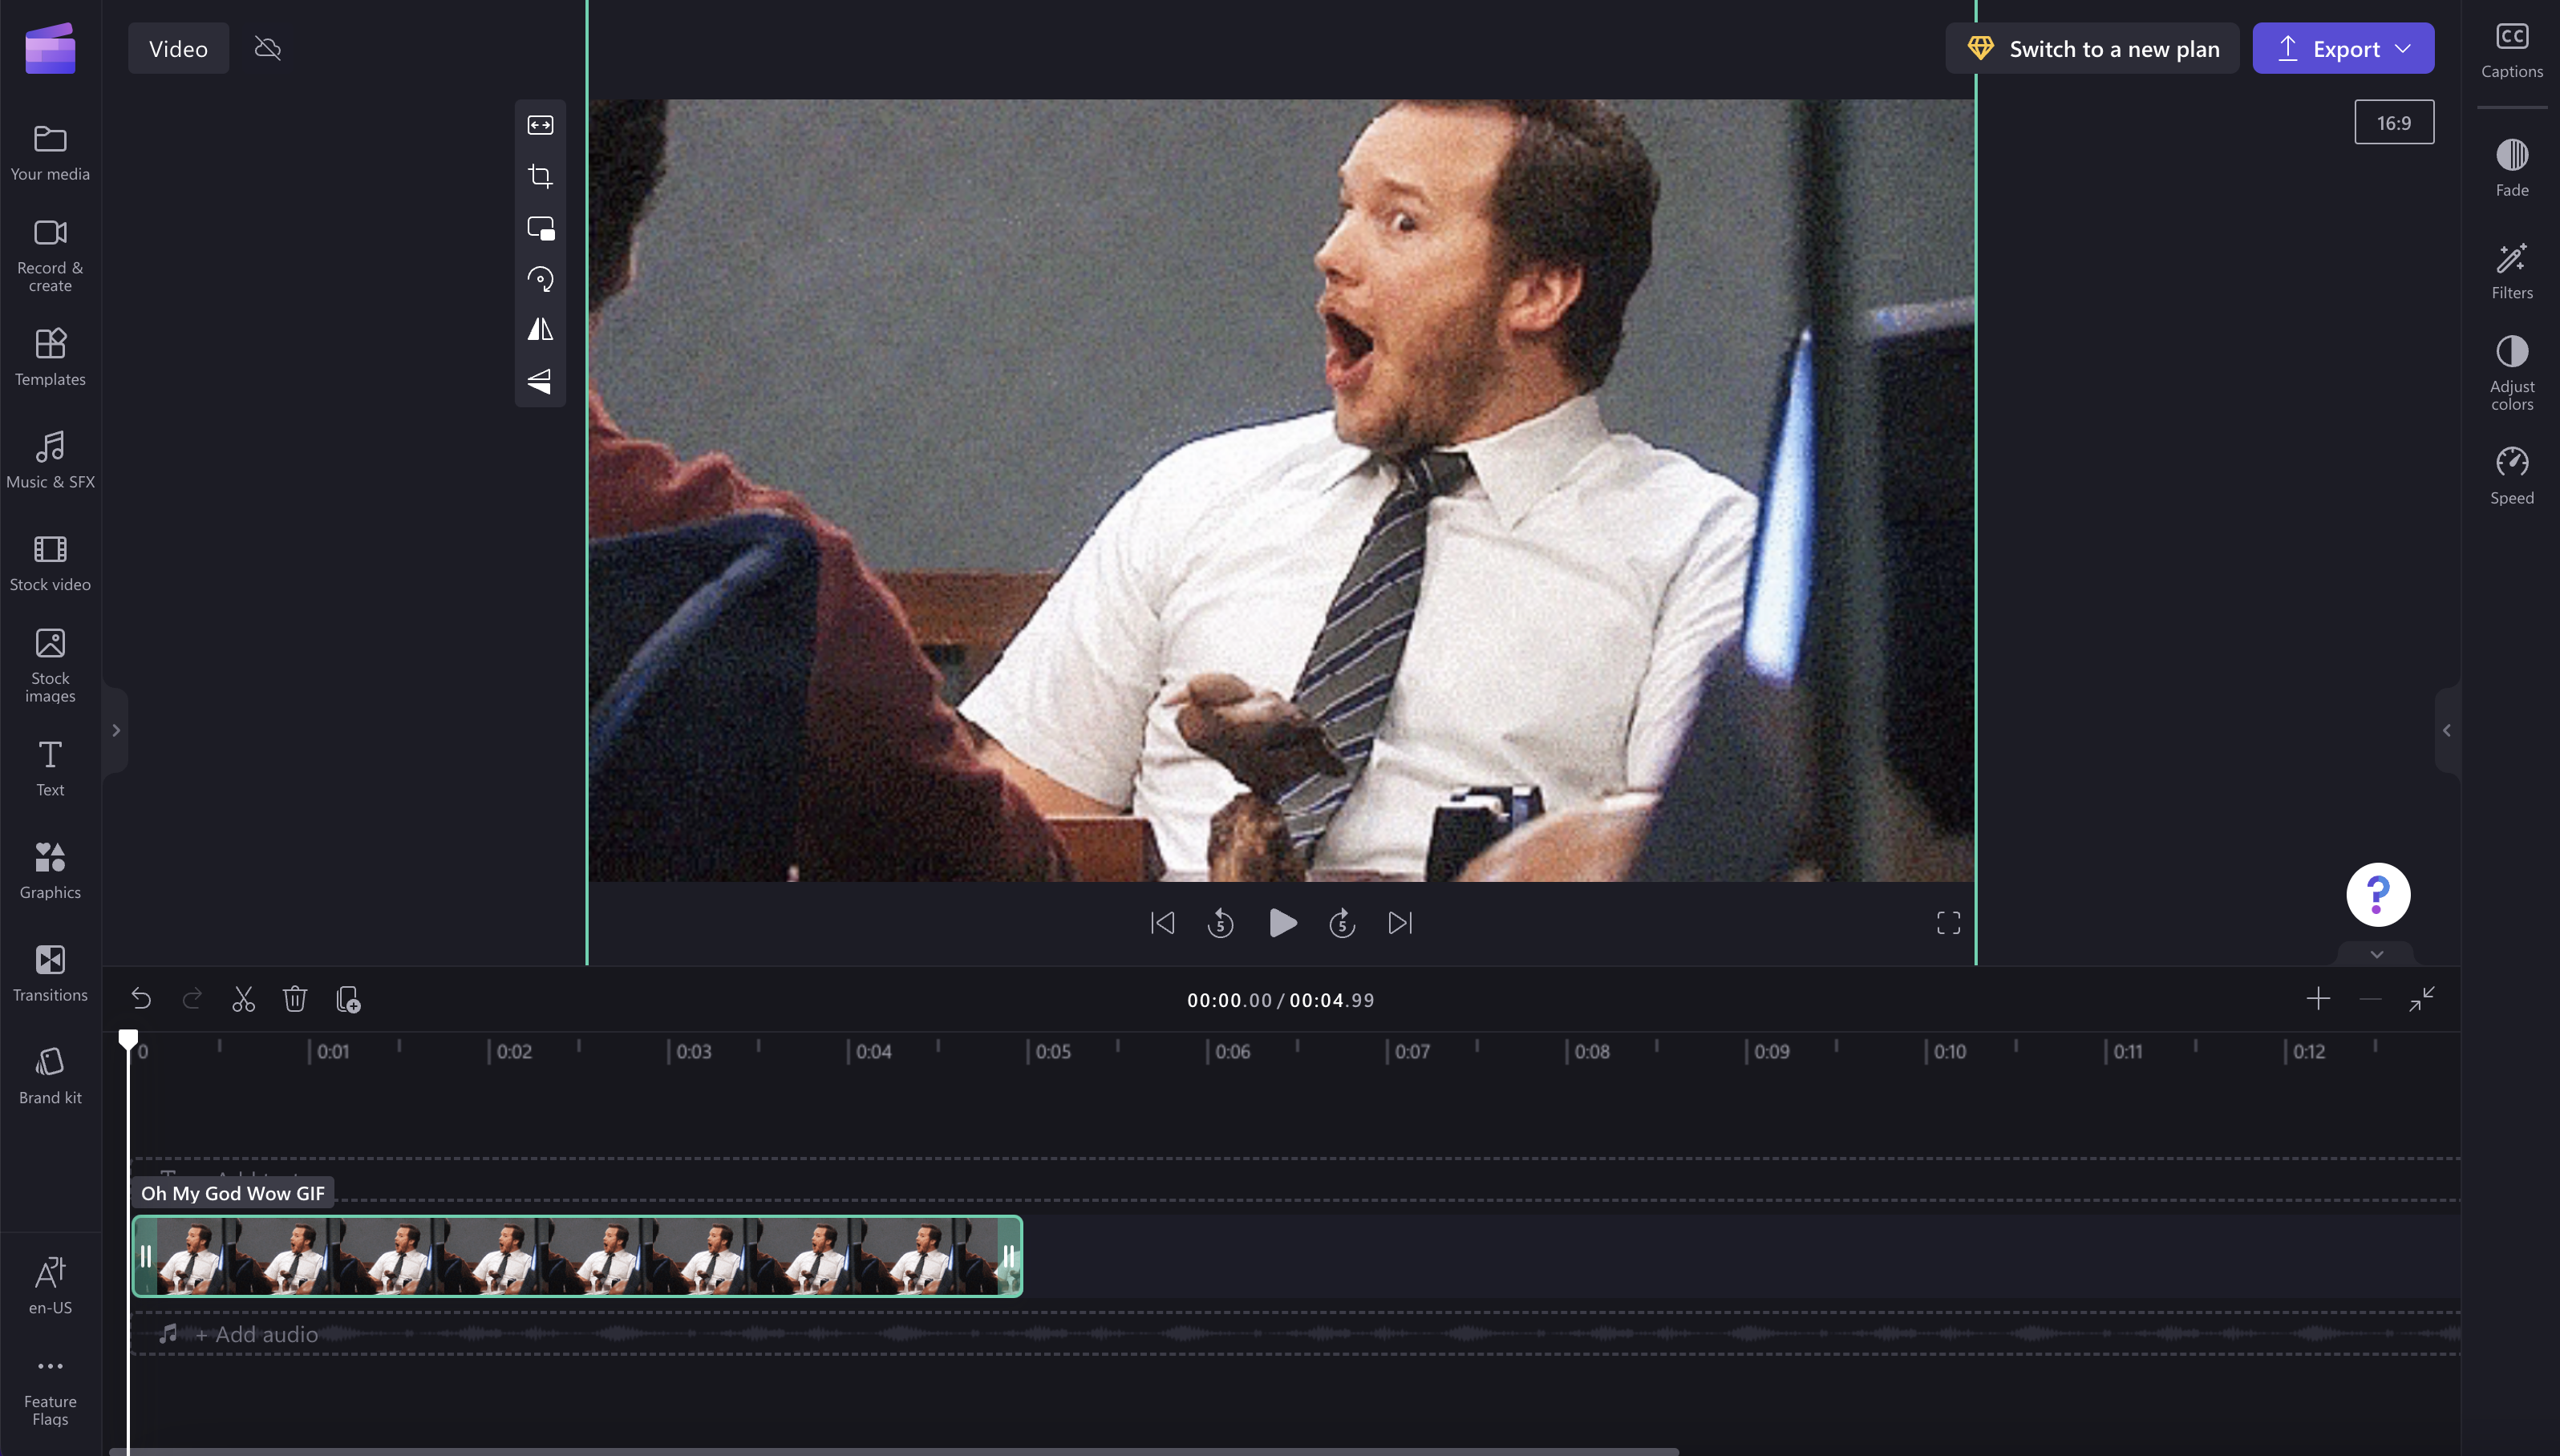 An image of a GIF that fits the video aspect ratio.